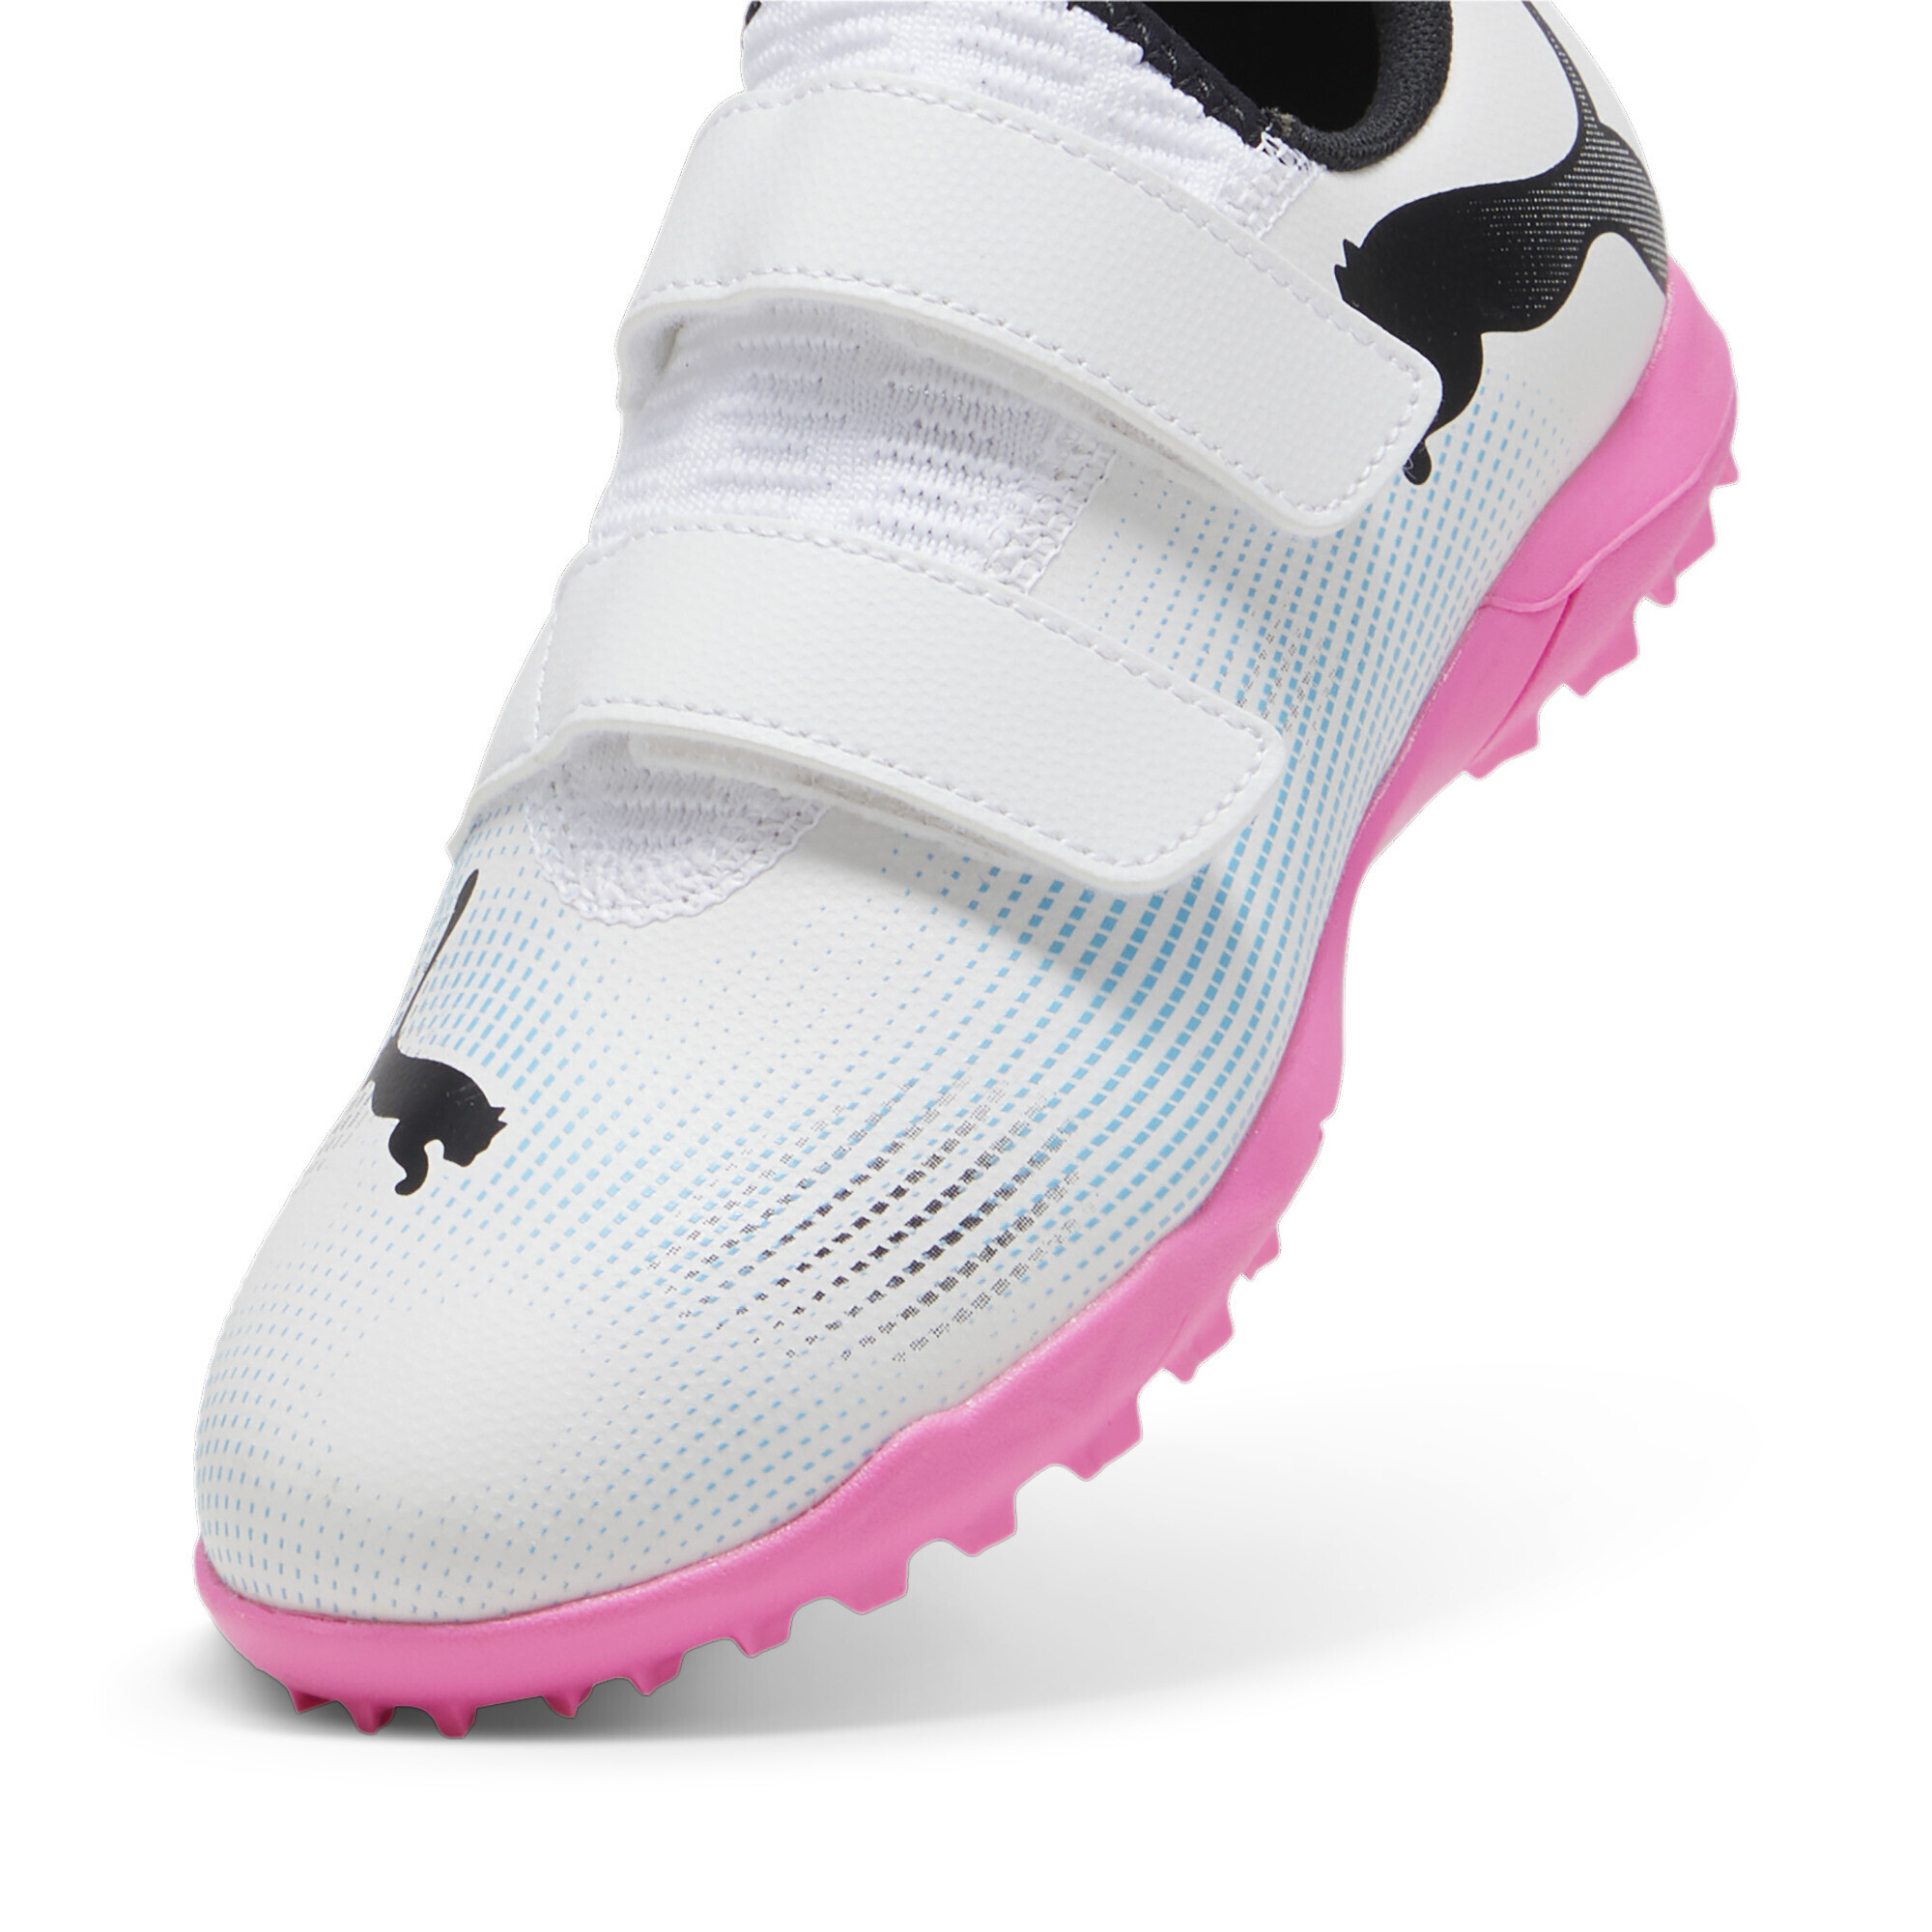 PUMA FUTURE 7 PLAY TT Youth Football Boots In White/Pink, Size EU 36